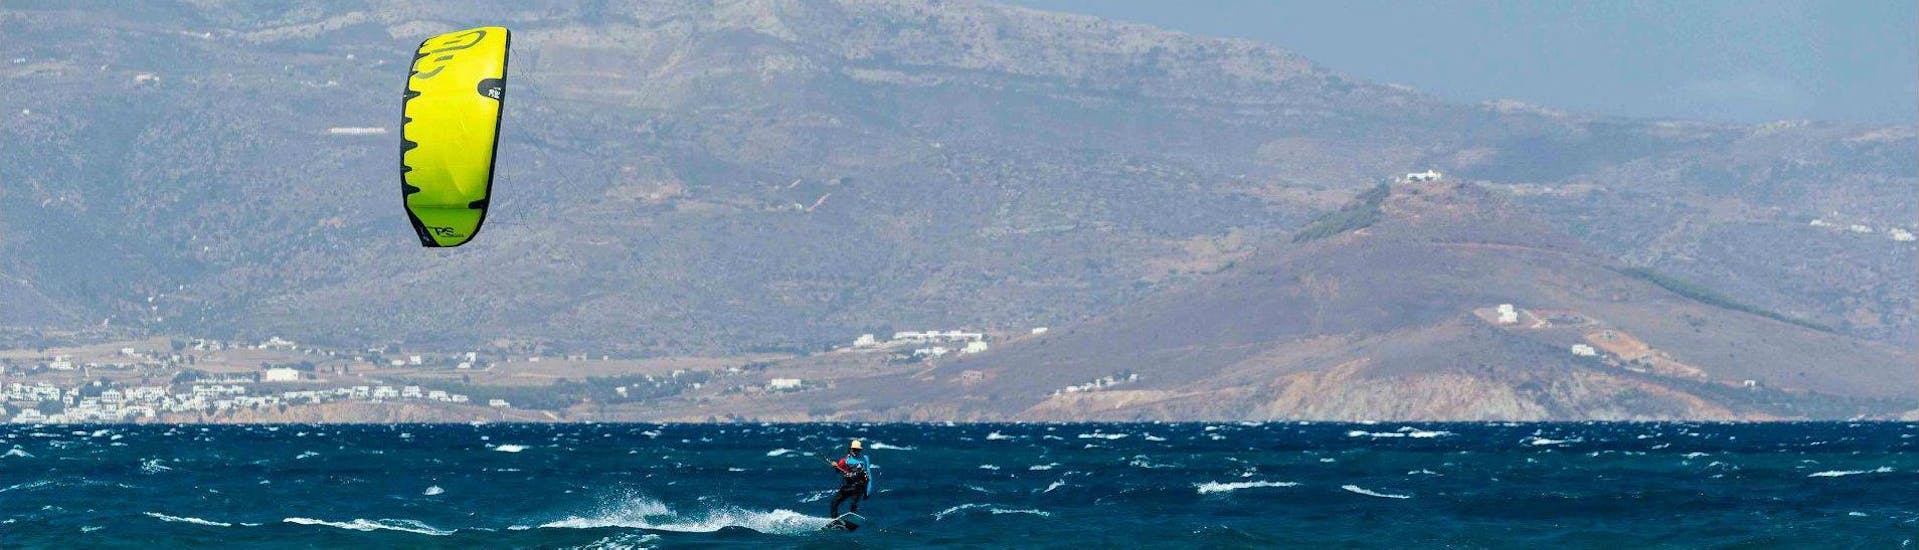 Semi-Private Kitesurfing Lessons for All Levels &amp; Ages with Naxos Kitelife - Hero image